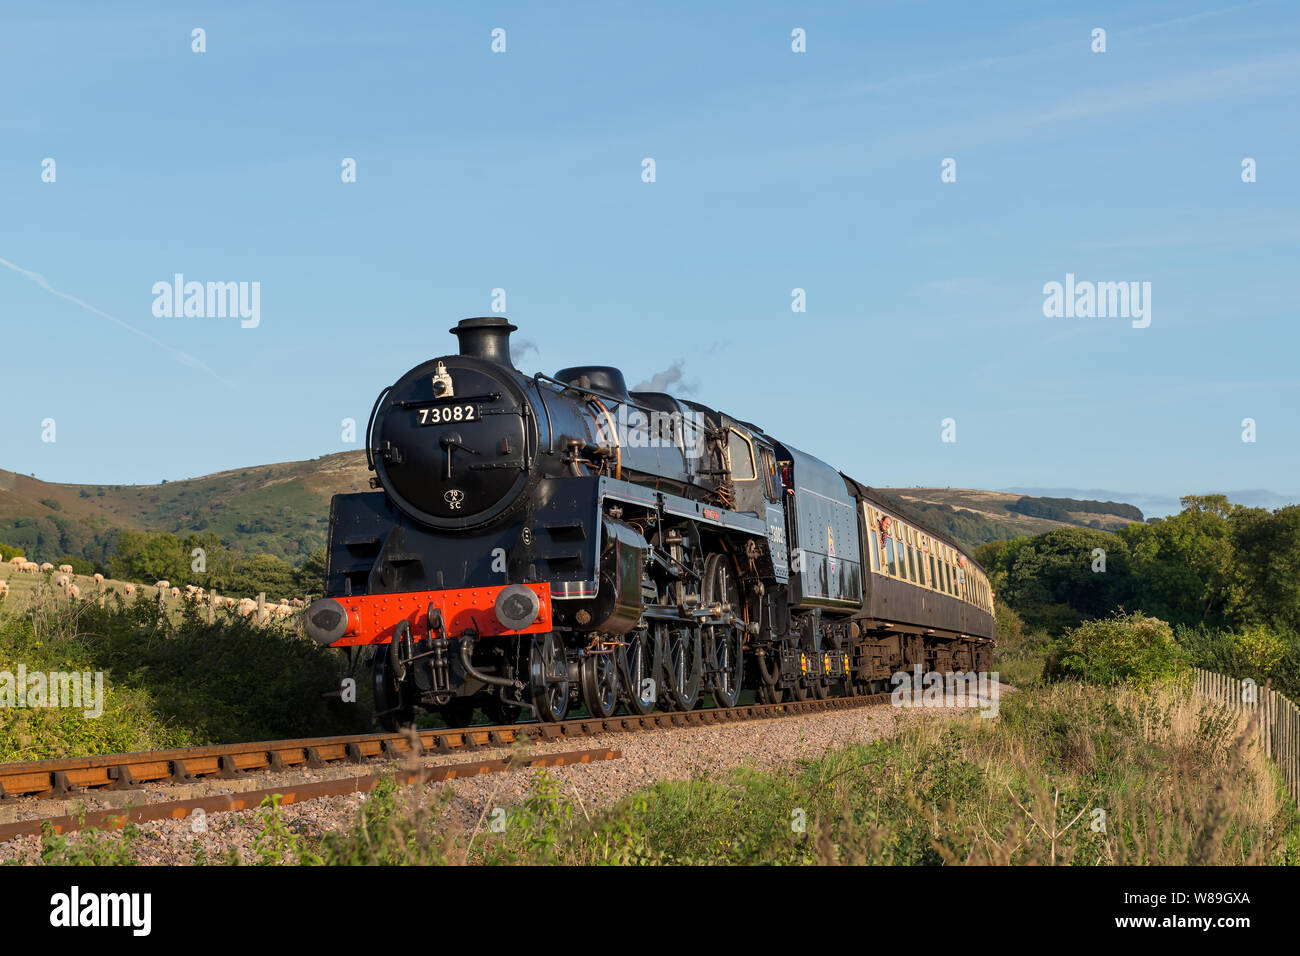 BR standard 5 No.73082 works a train on the West Somerset railway Stock Photo